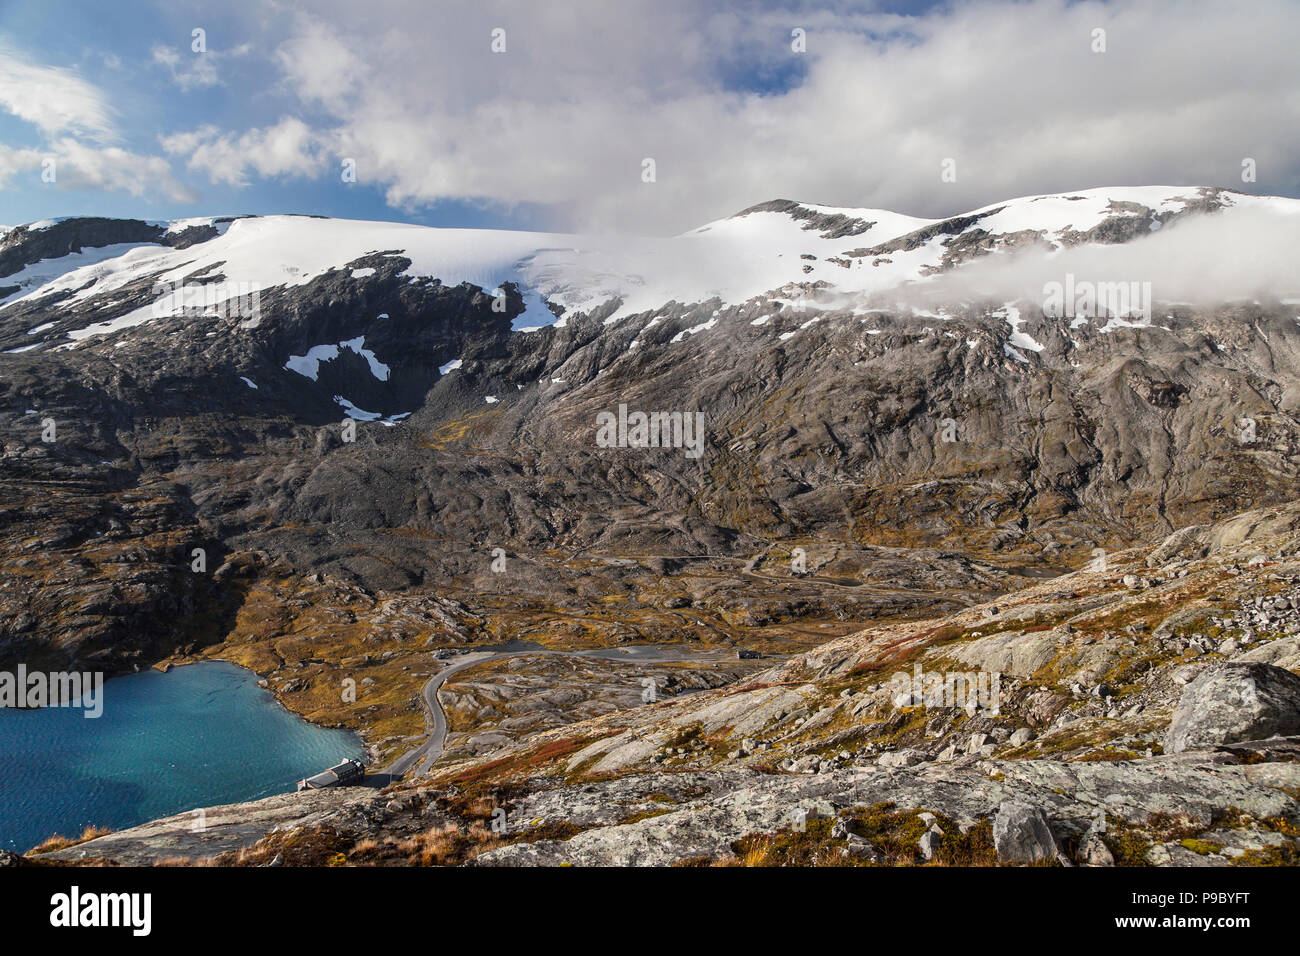 Djupvatnet Lake, Skjerdingdalsbreen Glacier and the Flydal Valley from Dalsnibba, Geiranger, Norway. Stock Photo